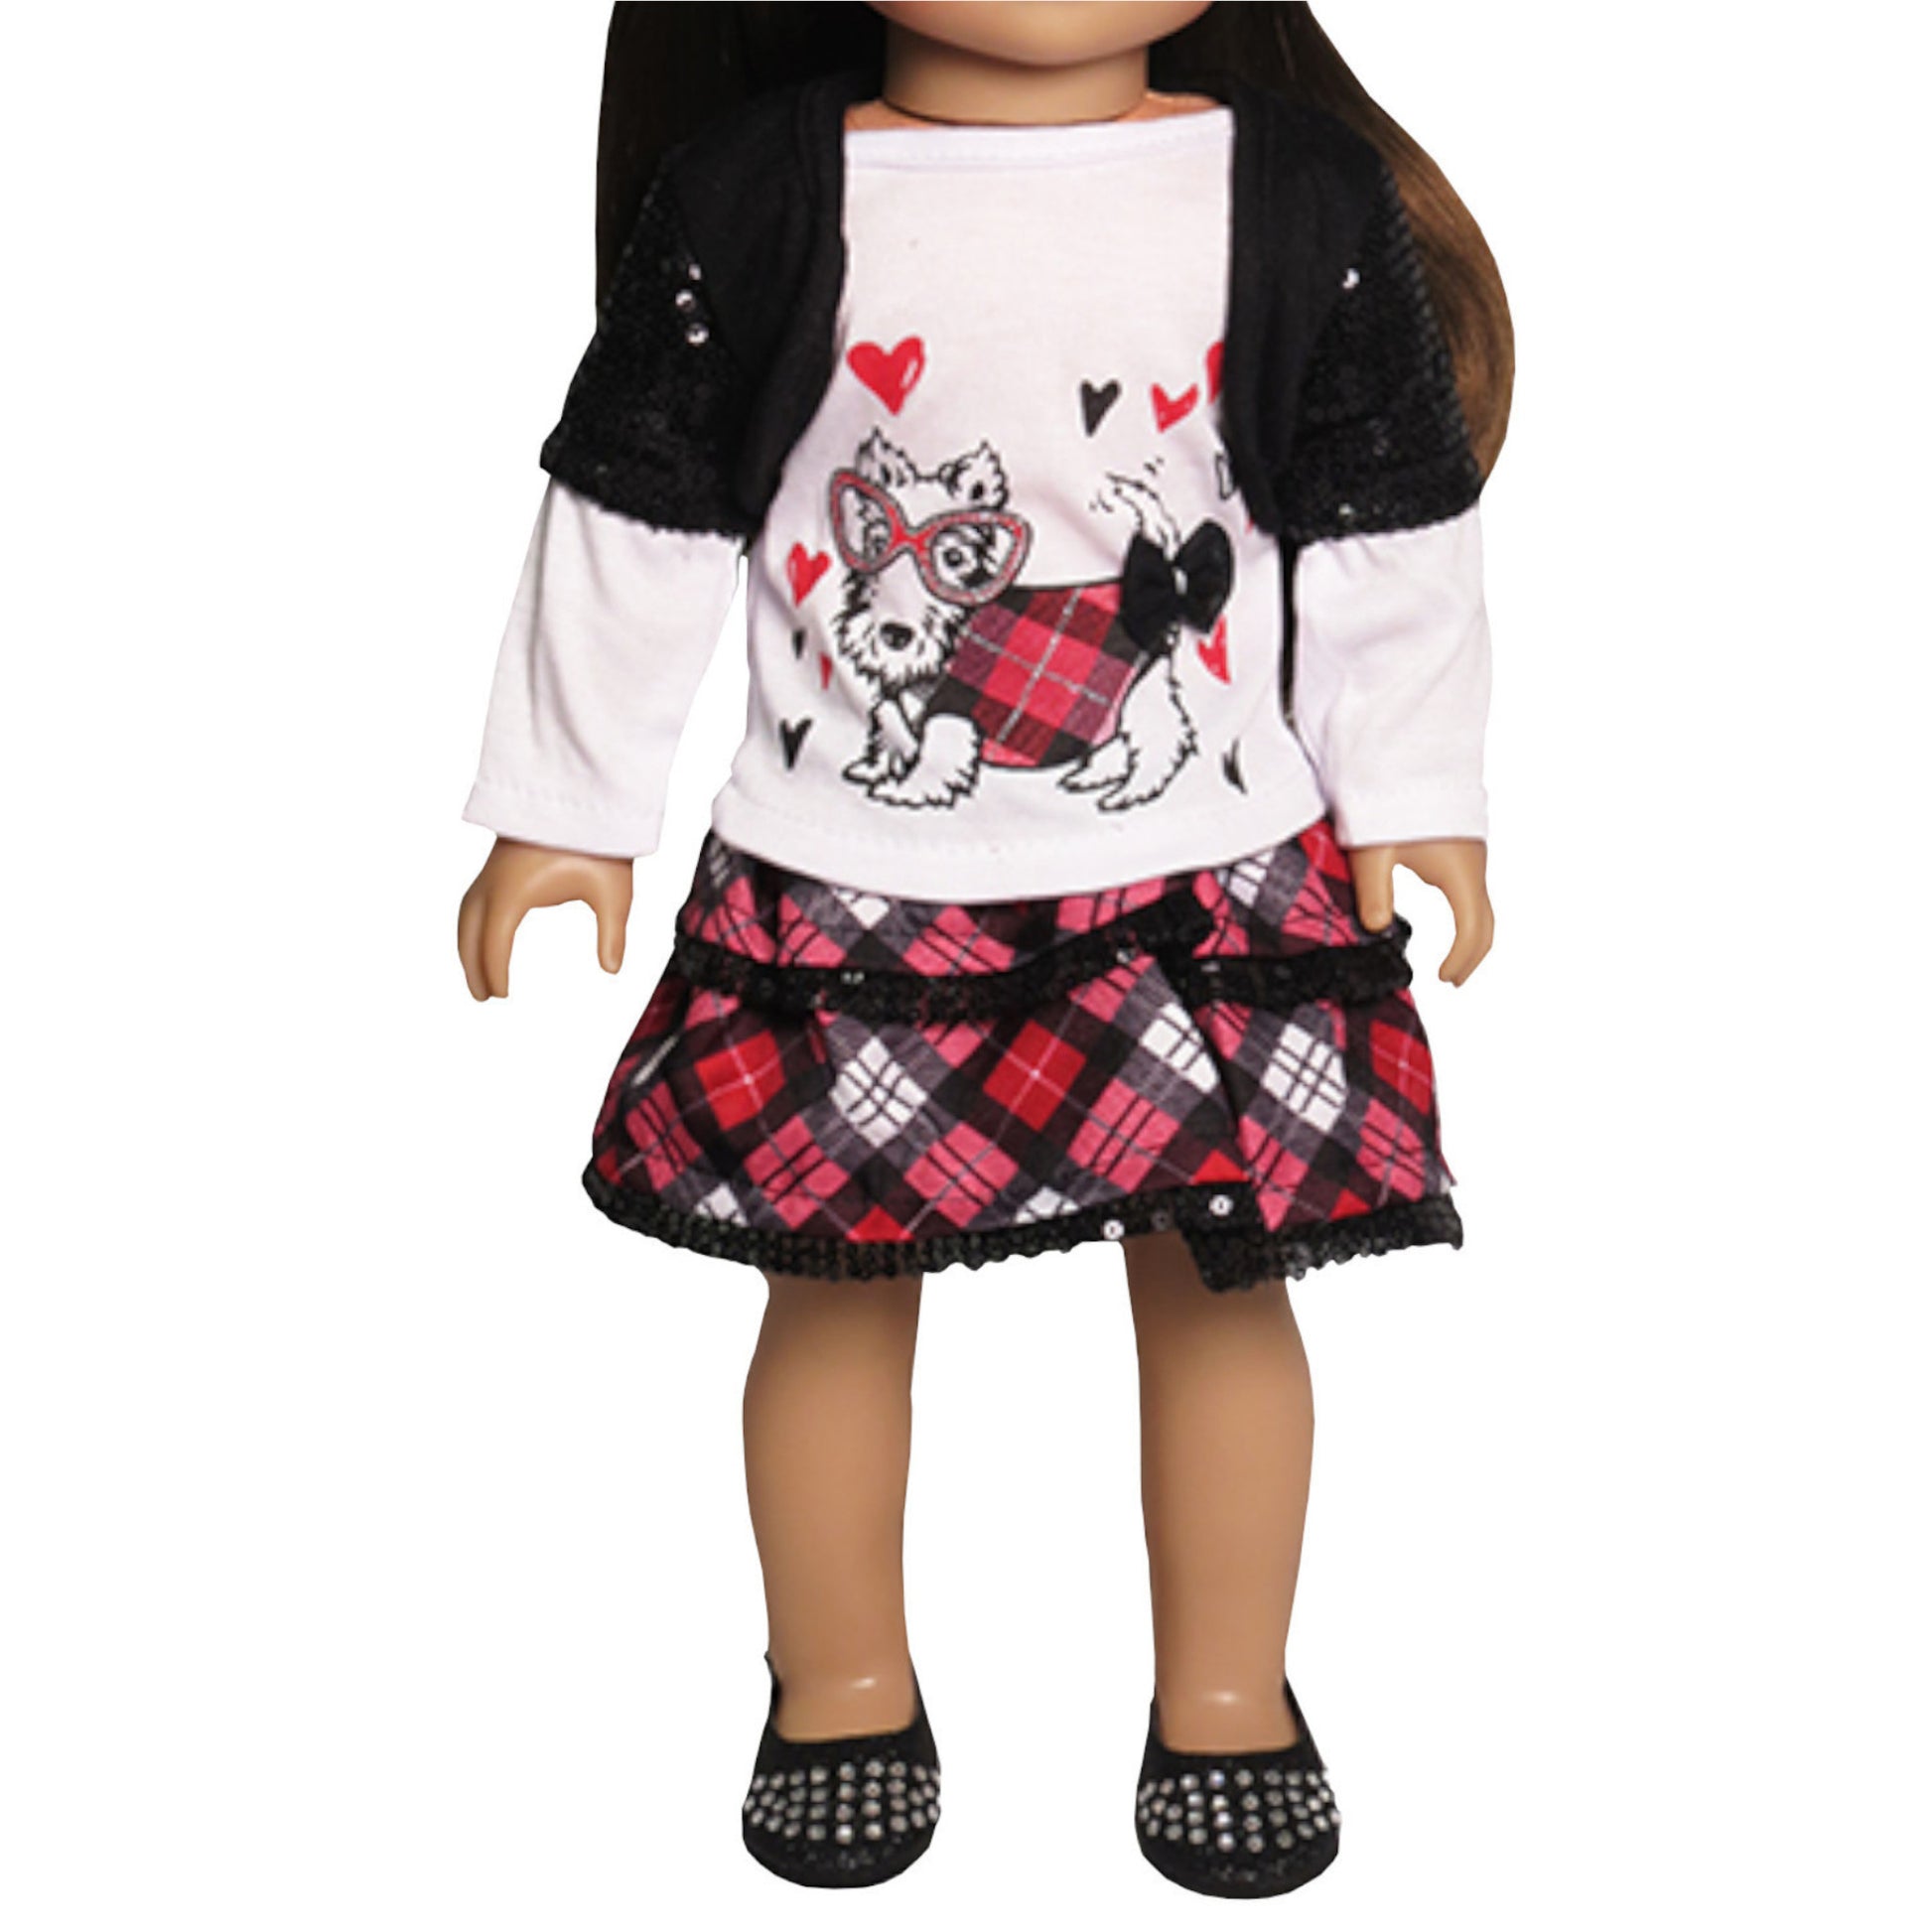 Plaid Glamour Puppy Outfit for 18-inch dolls with doll